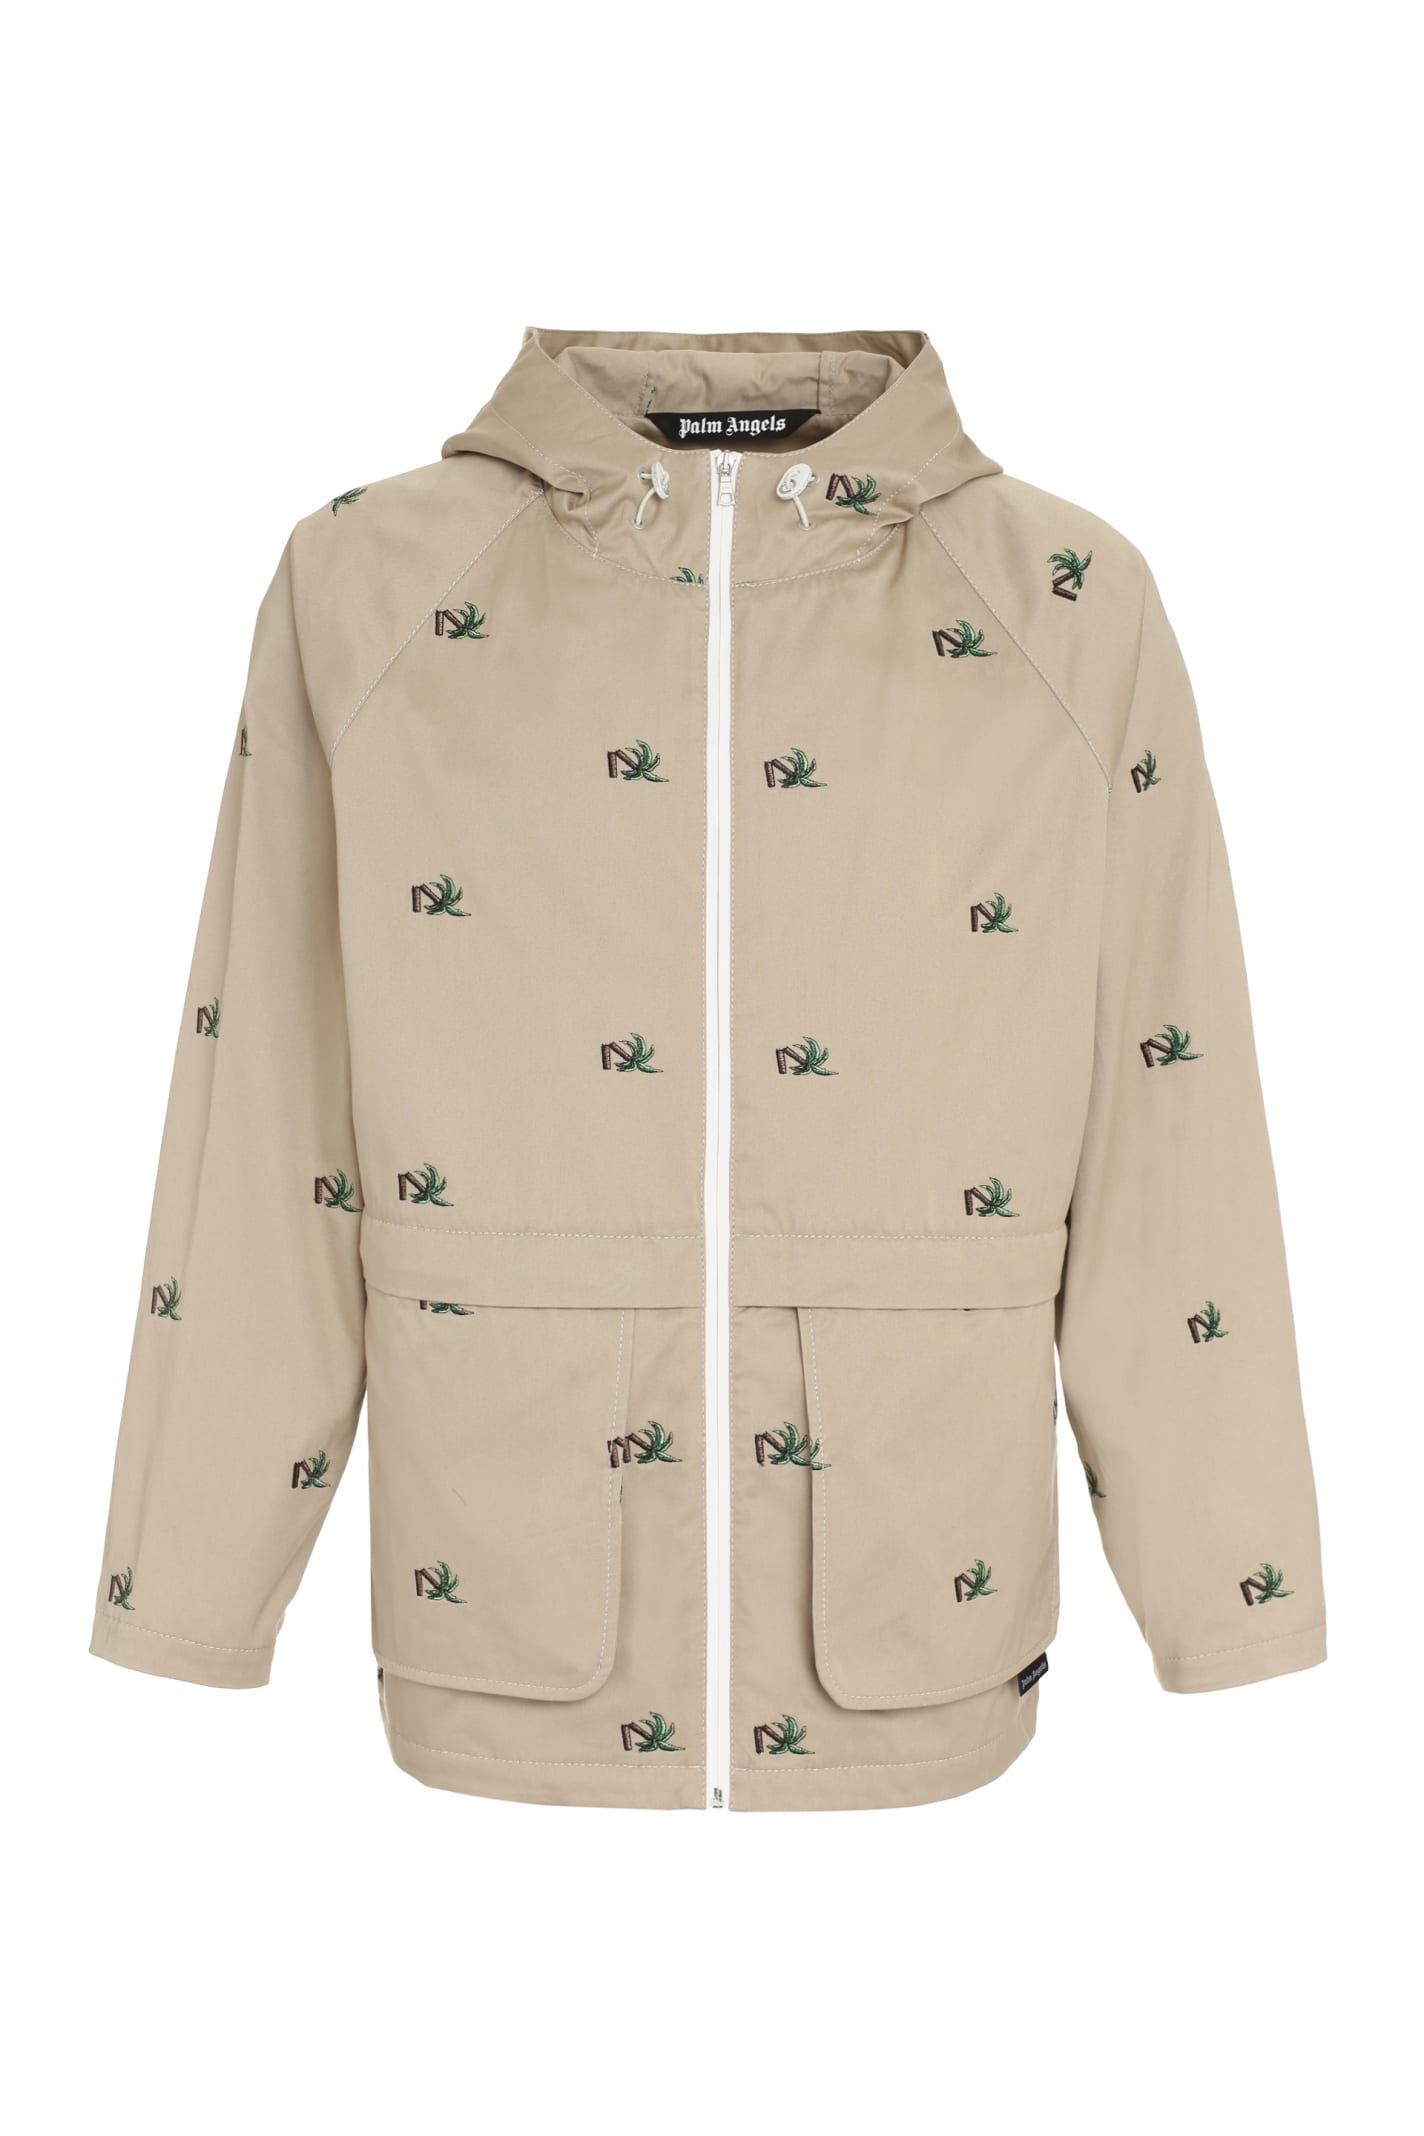 Palm Angels Hooded Cotton Parka